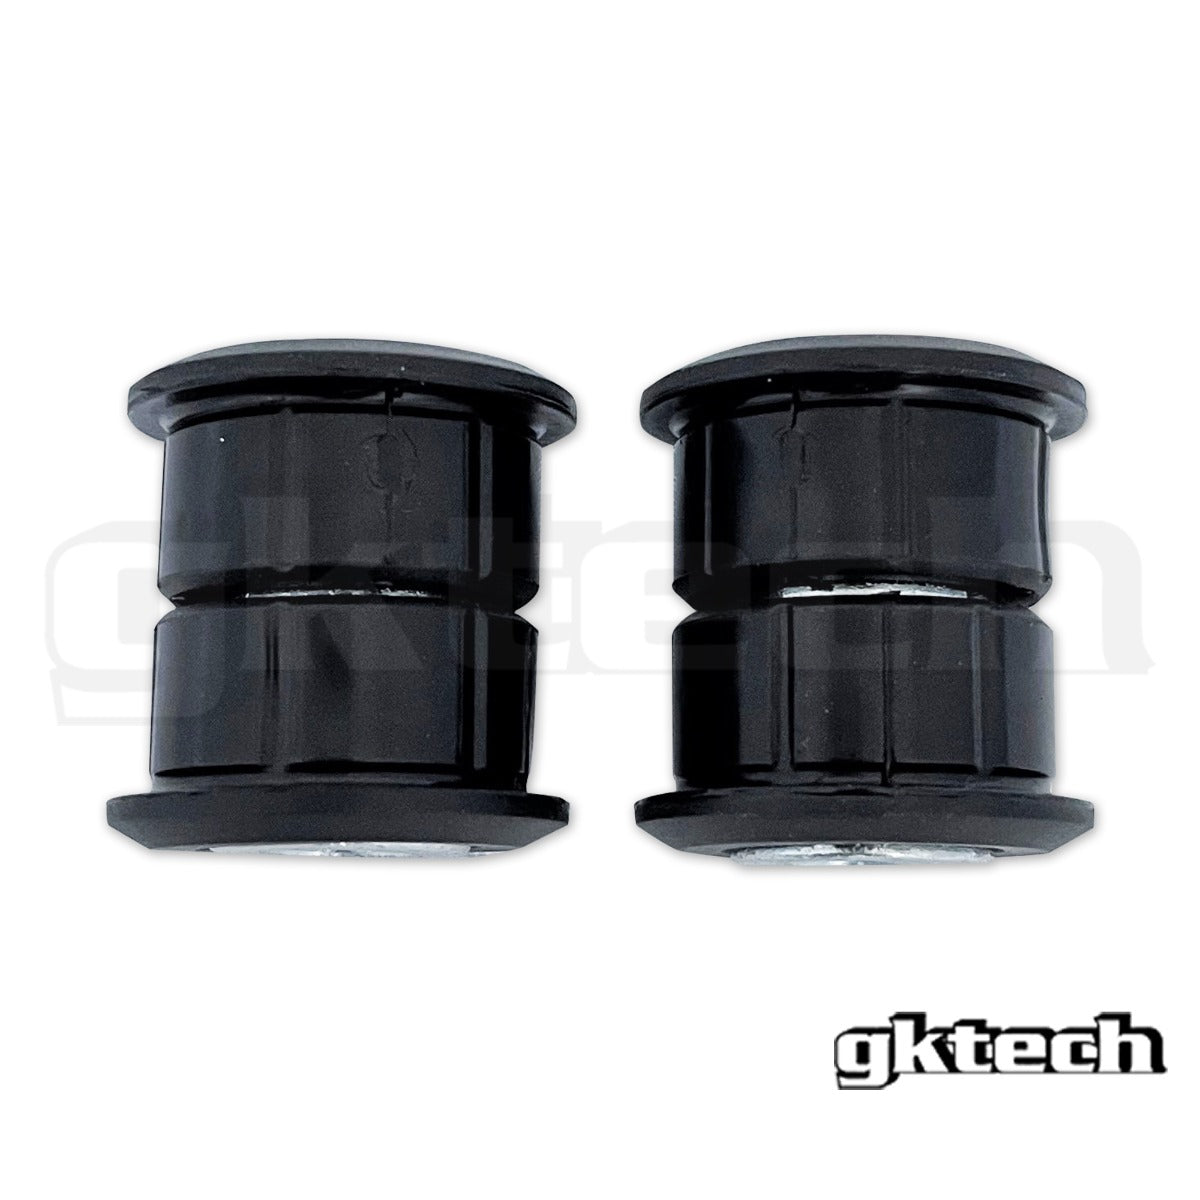 Polyurethane S/R/Z Chassis Rear Knuckle Bushes (pair)